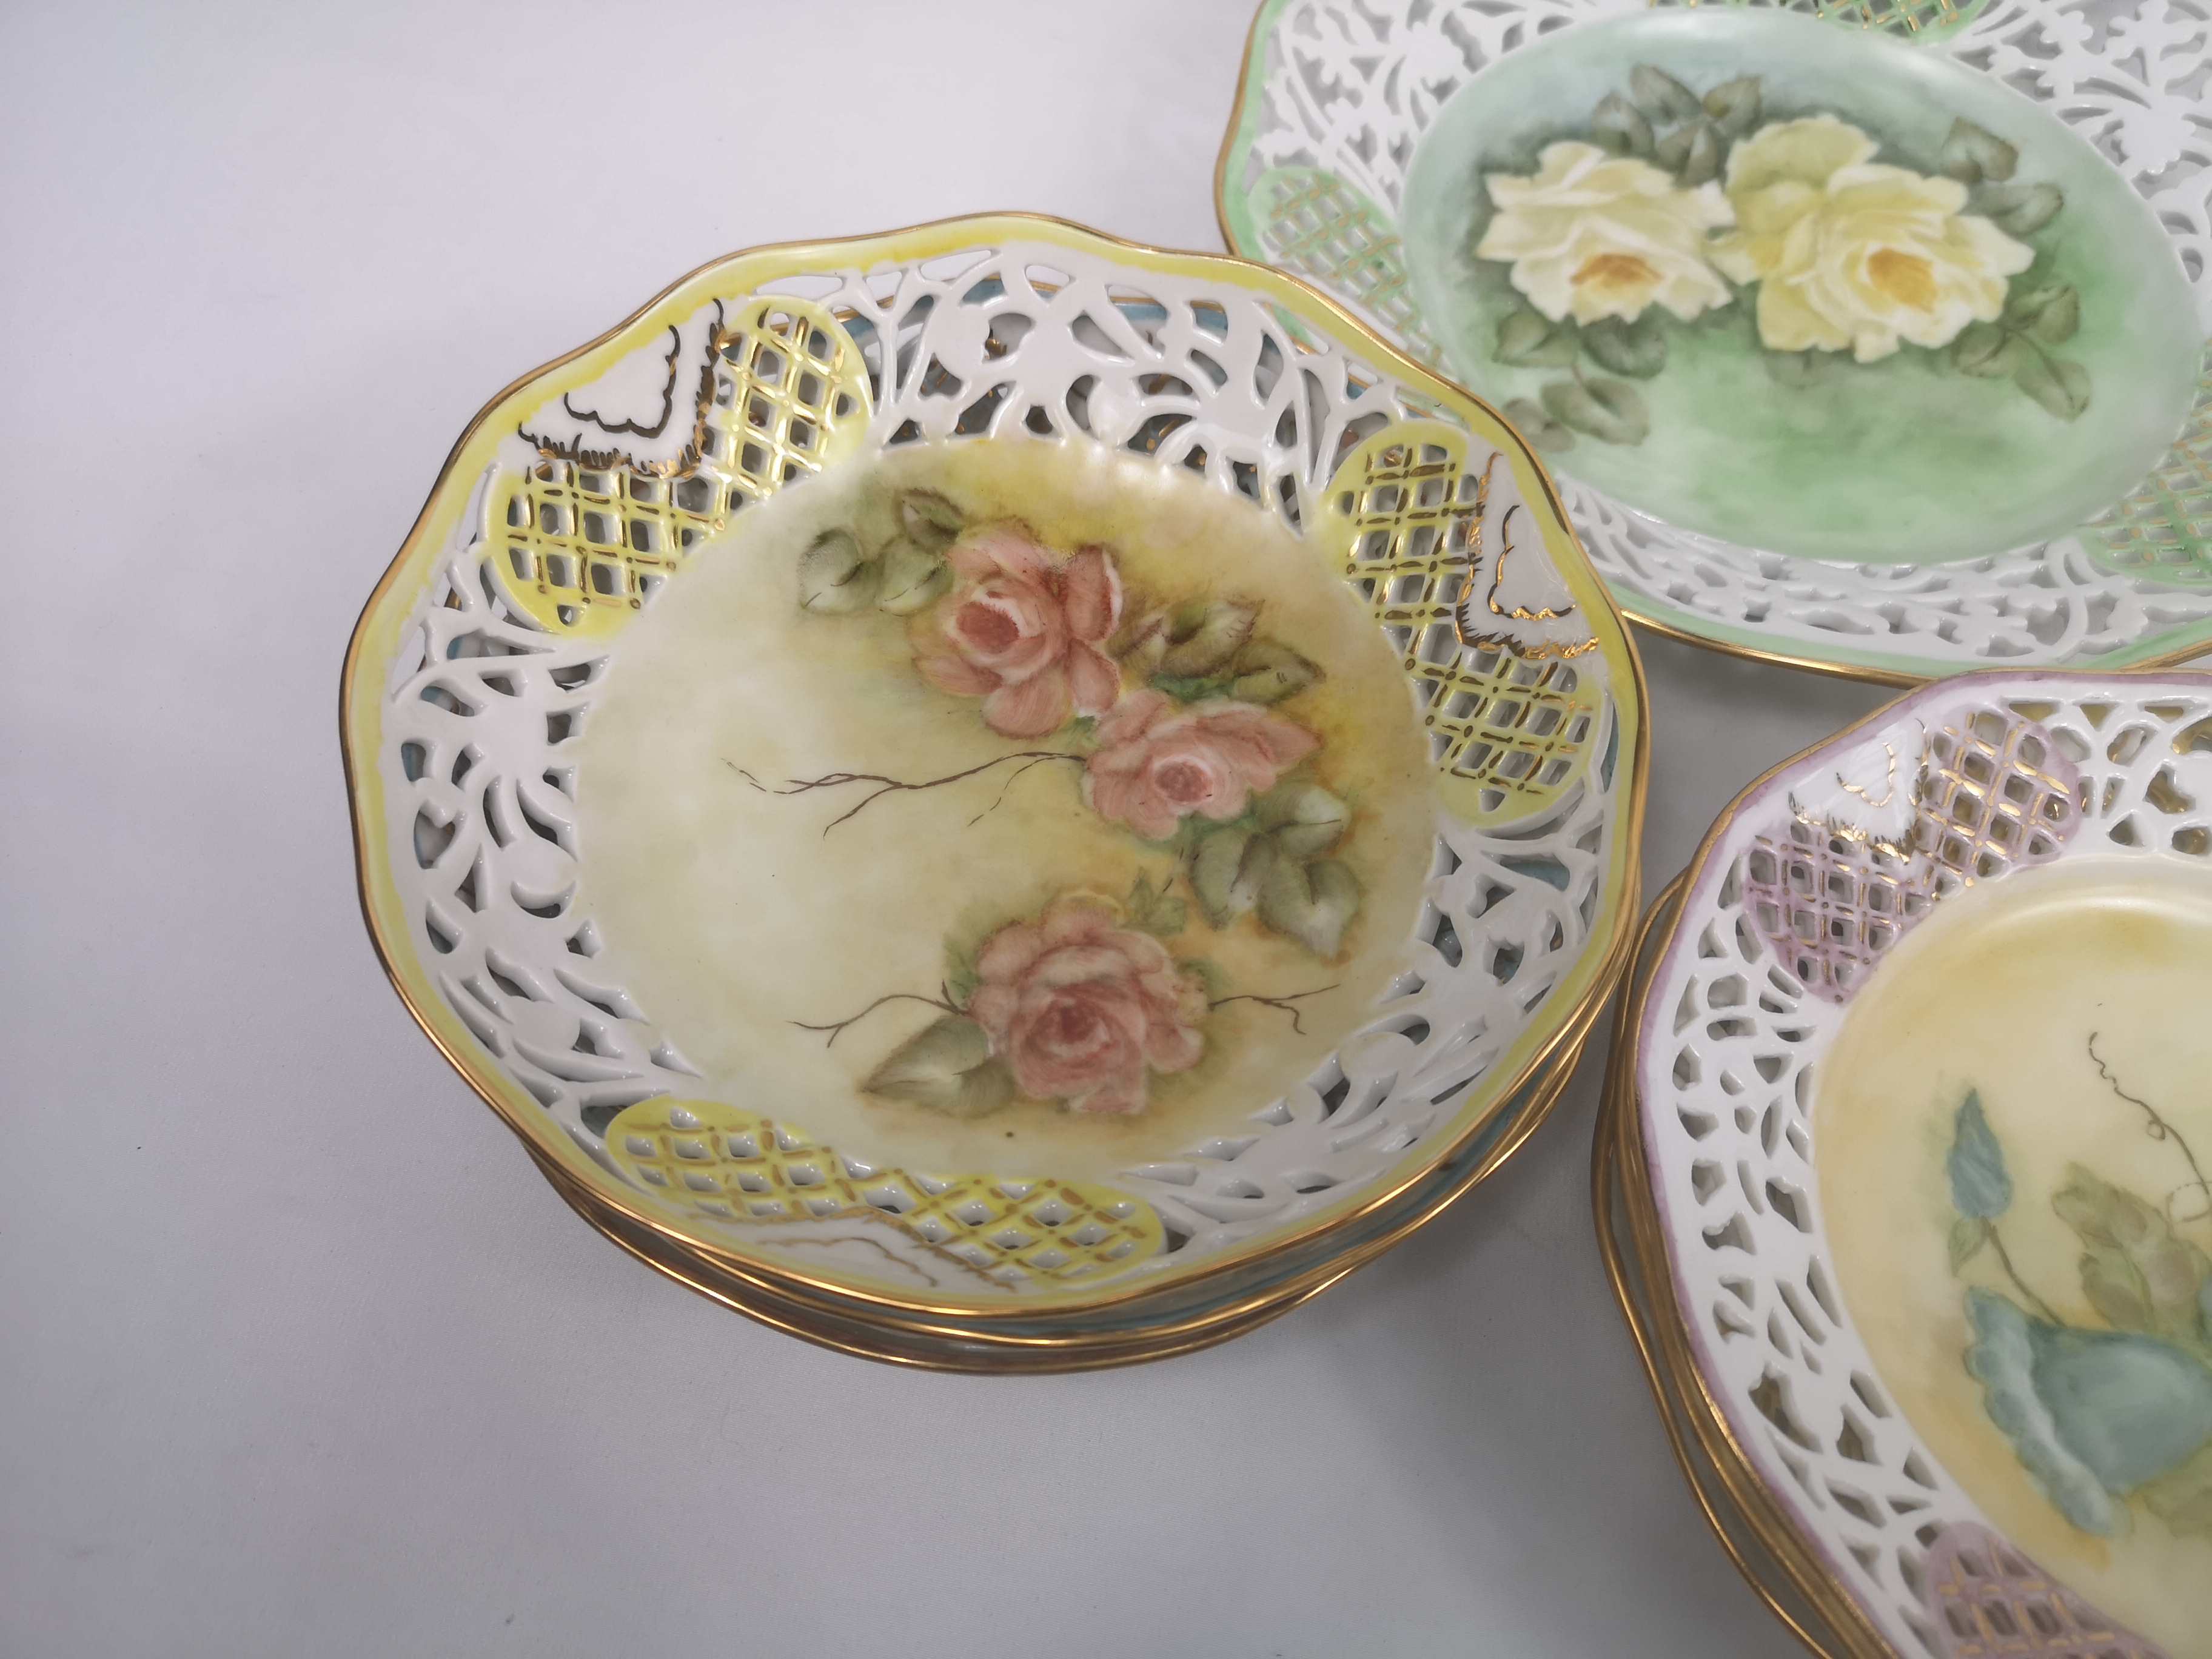 Quantity of hand painted plates and bowls by Marjorie Stevenson - Image 3 of 8